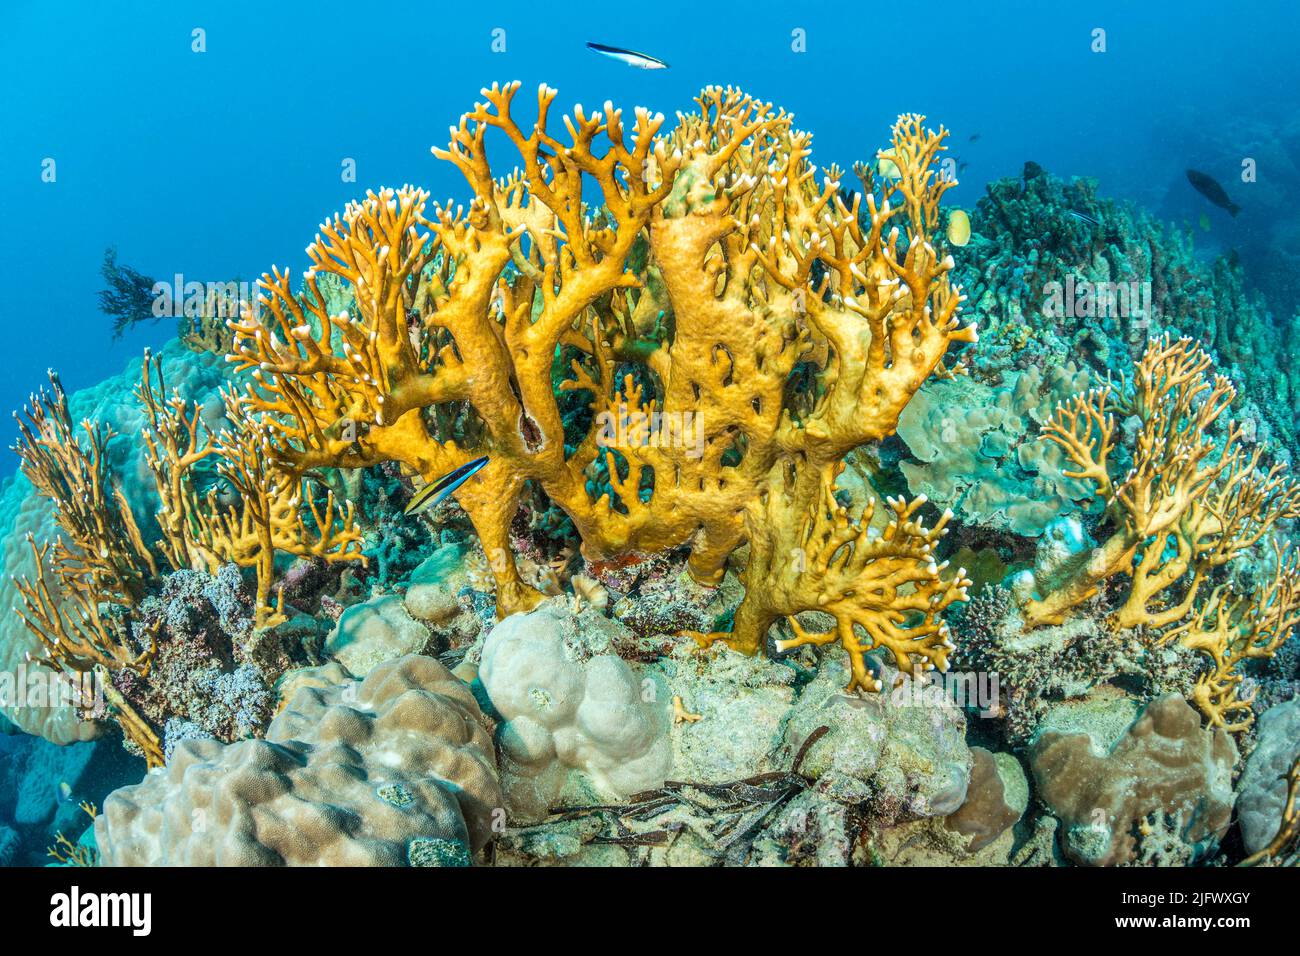 Fire coral, Millepora dichotoma, are similar to coral but are not true corals. They are instead more closely related to hydrozoans, making them hydroc Stock Photo